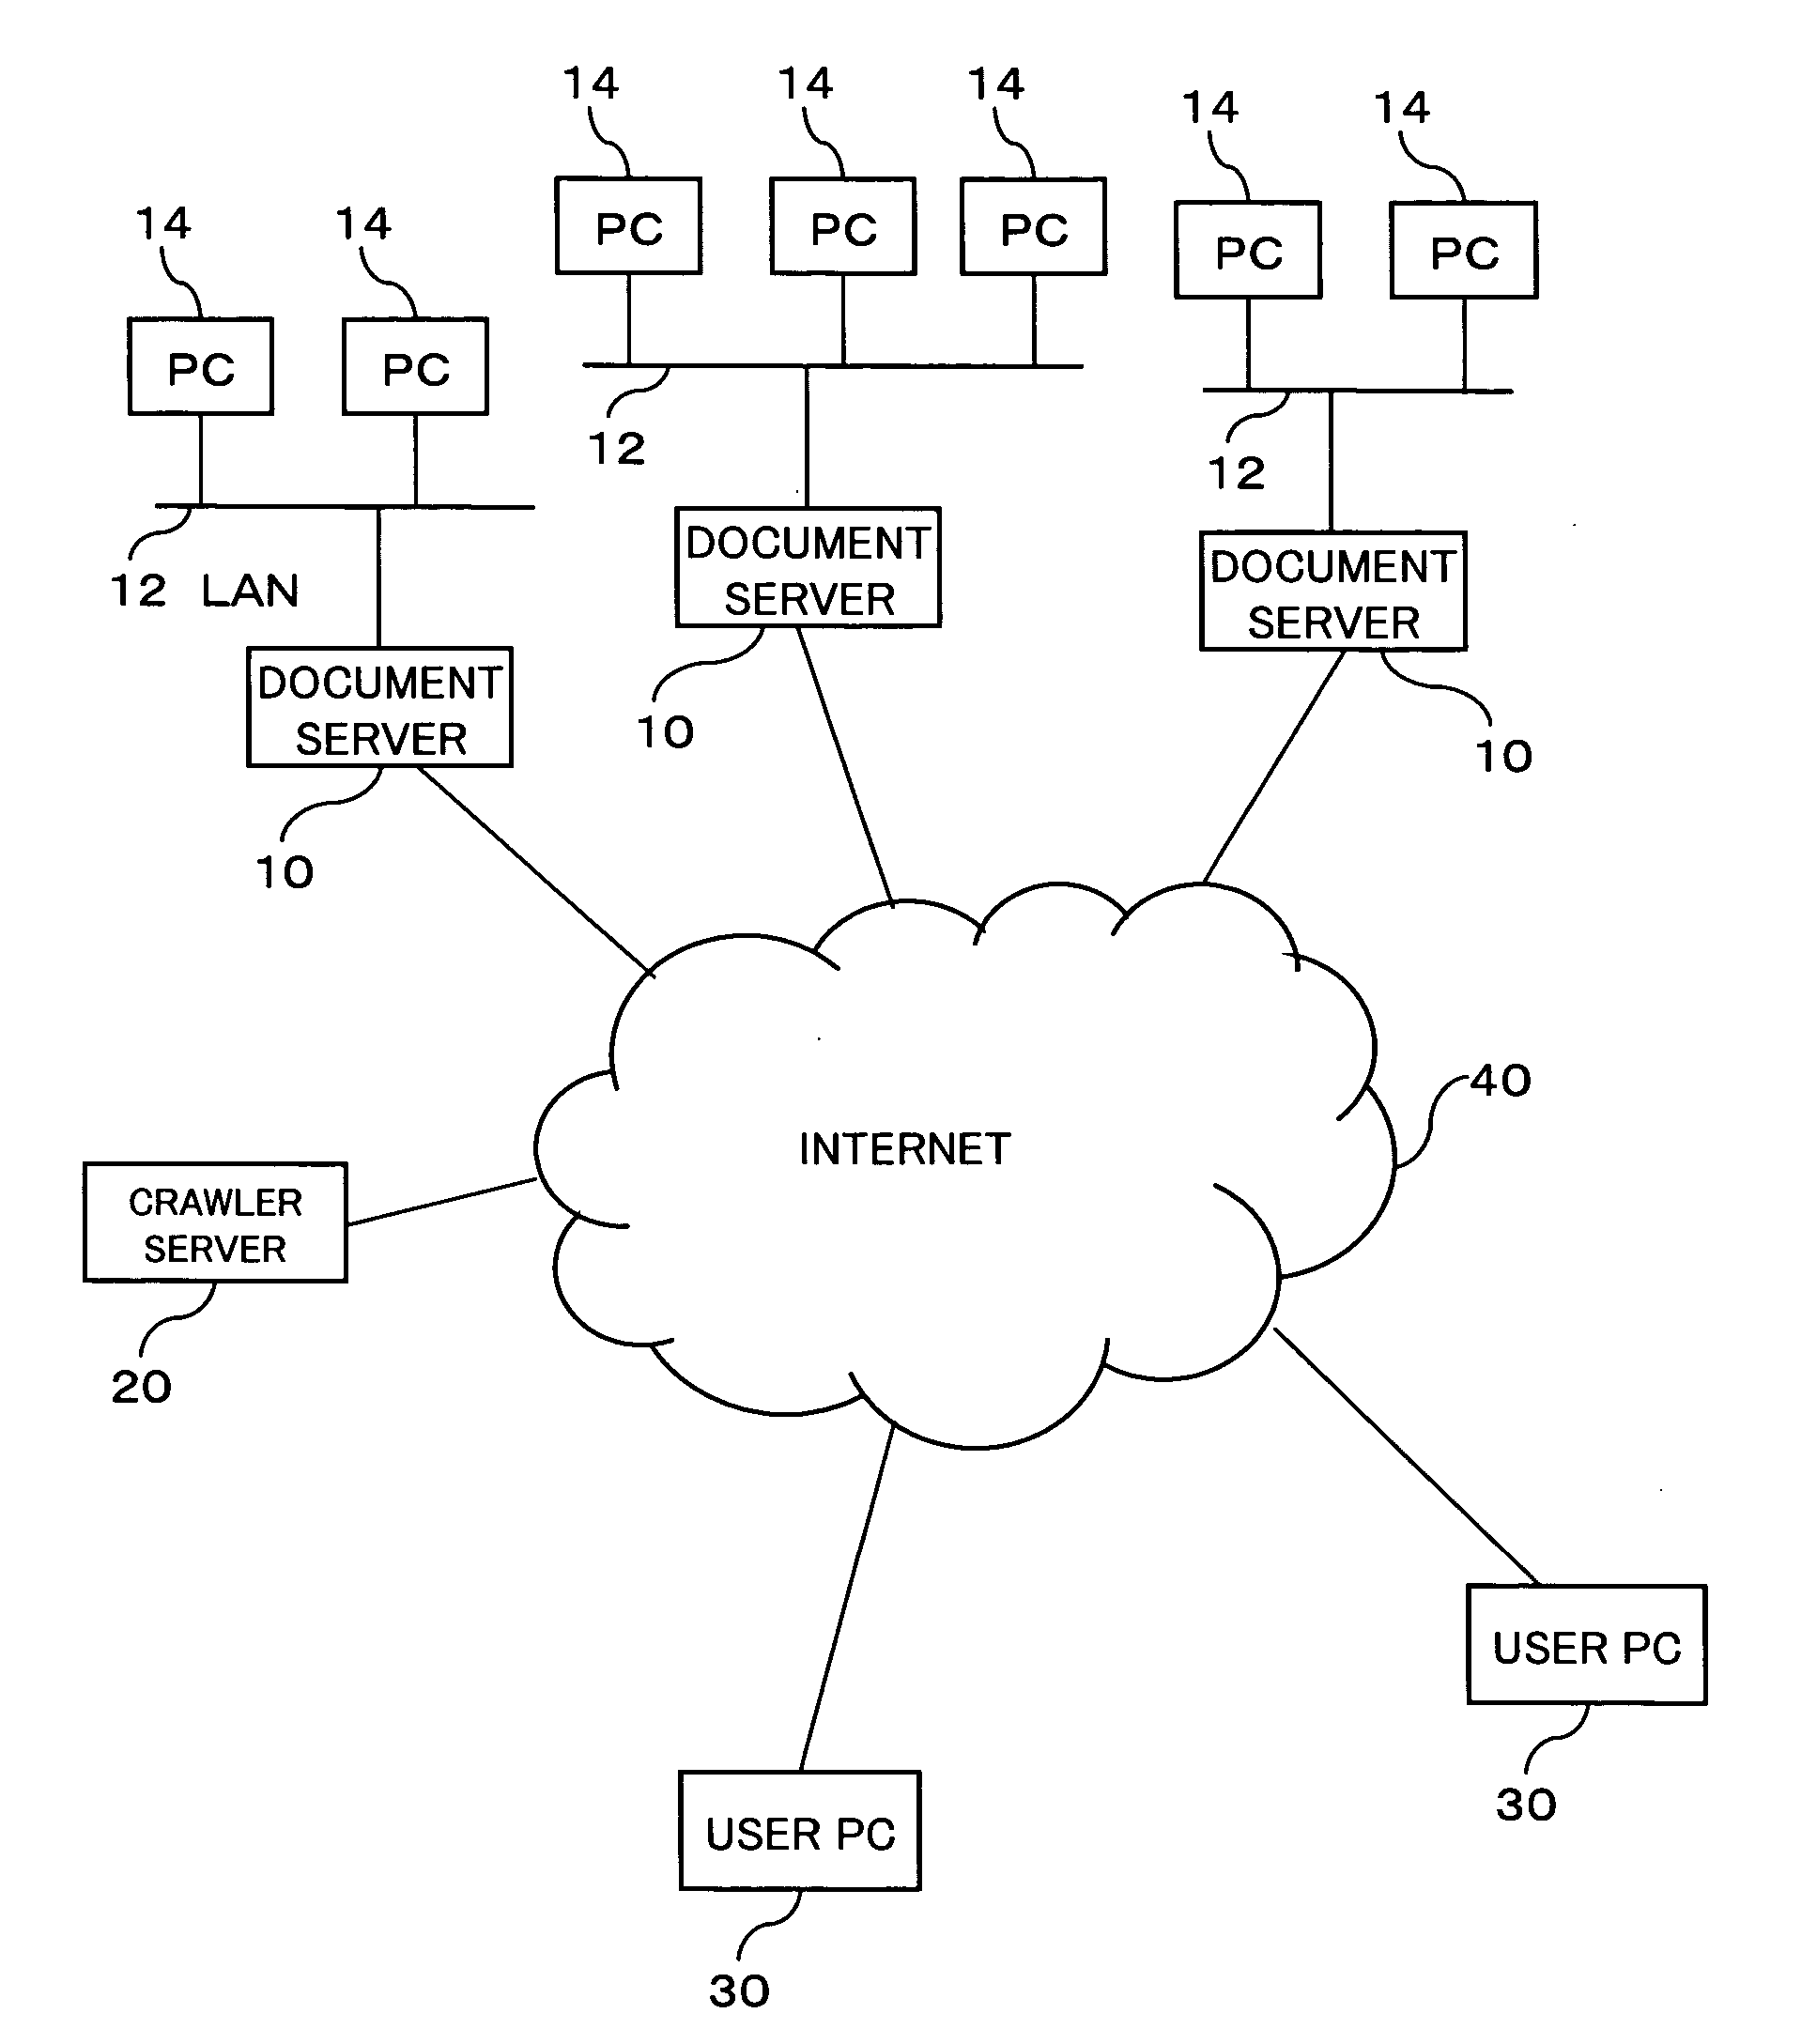 Computer program product, device system, and method for providing document view